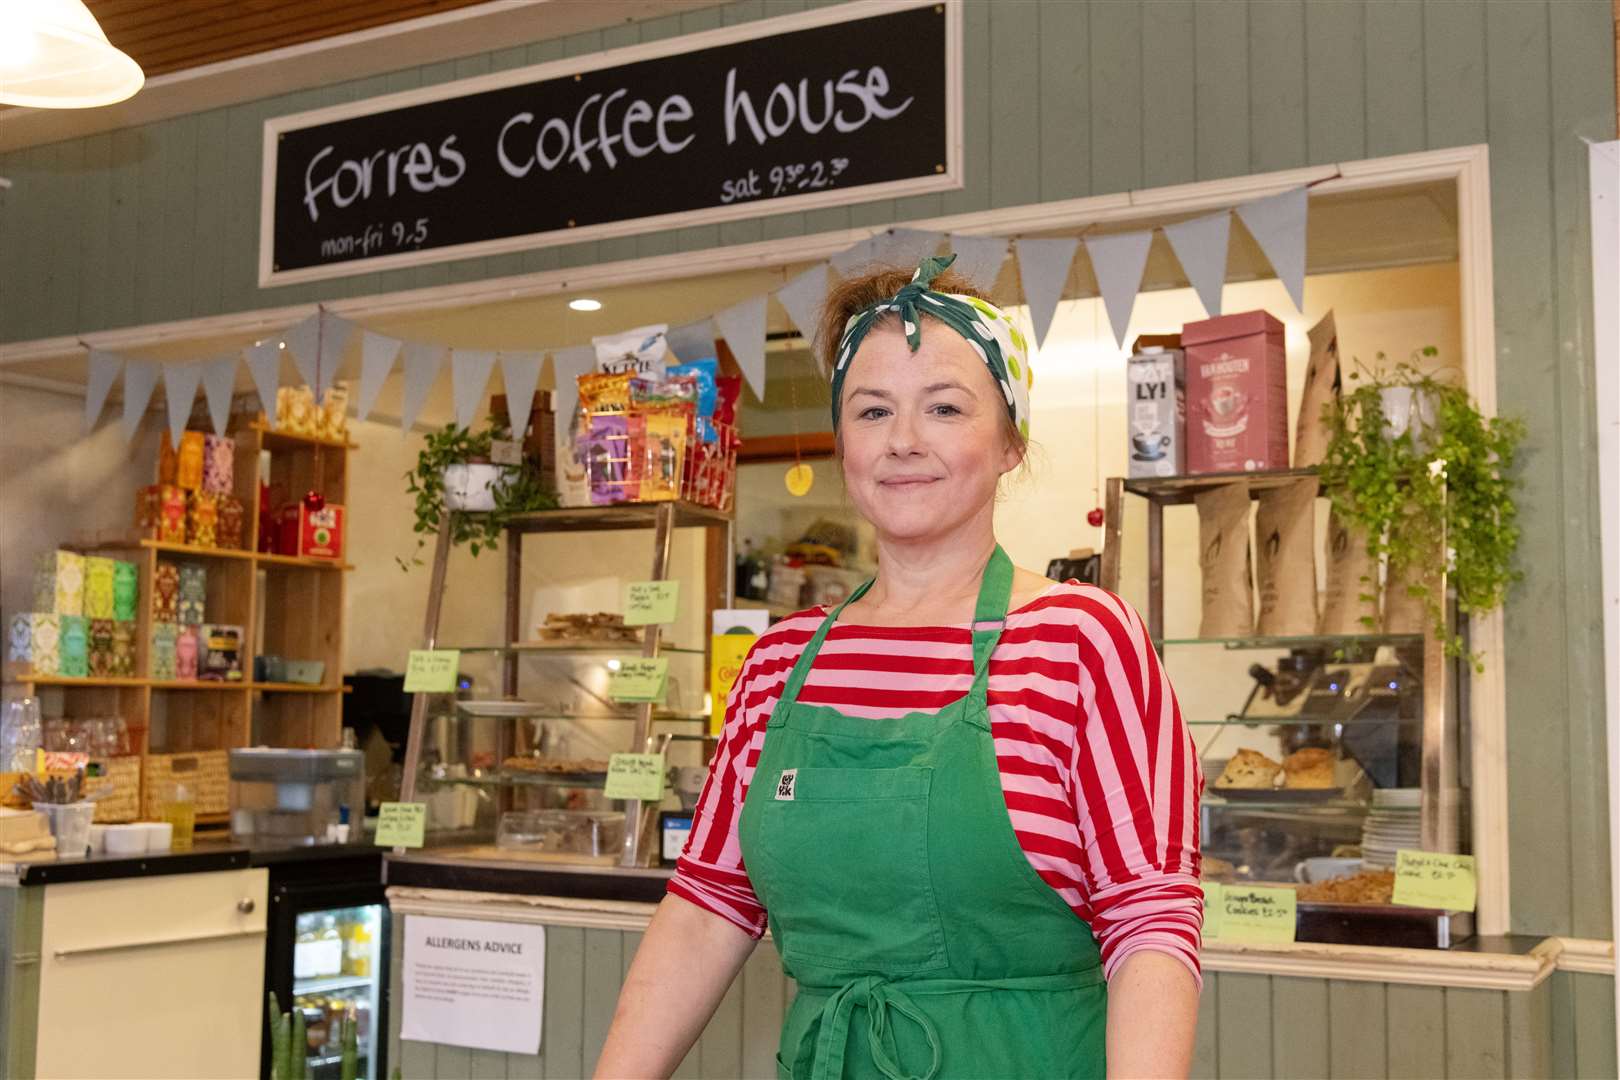 Anna Henderson of Forres Coffee House has been helping with the celebrations.